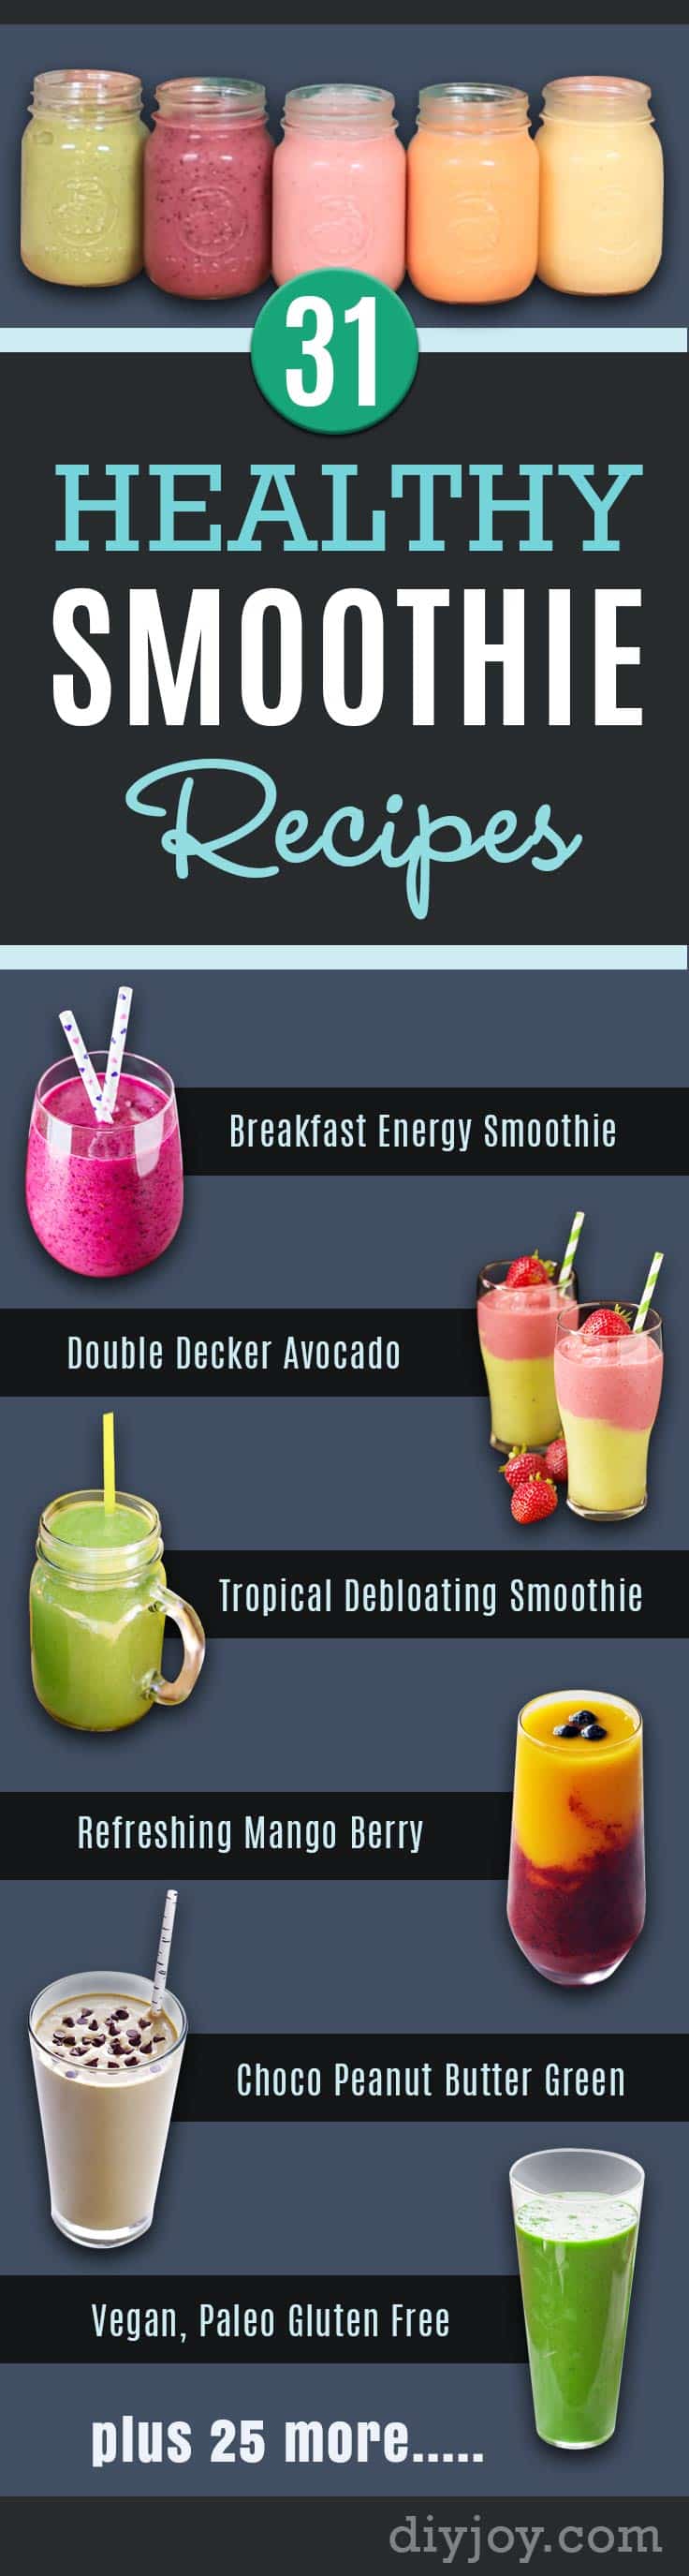 Healthy Smoothie Recipes - Best Smoothies for Breakfast, Lunch, Dinner and Snack. LowFat and Hi Protein Mixes #smoothies